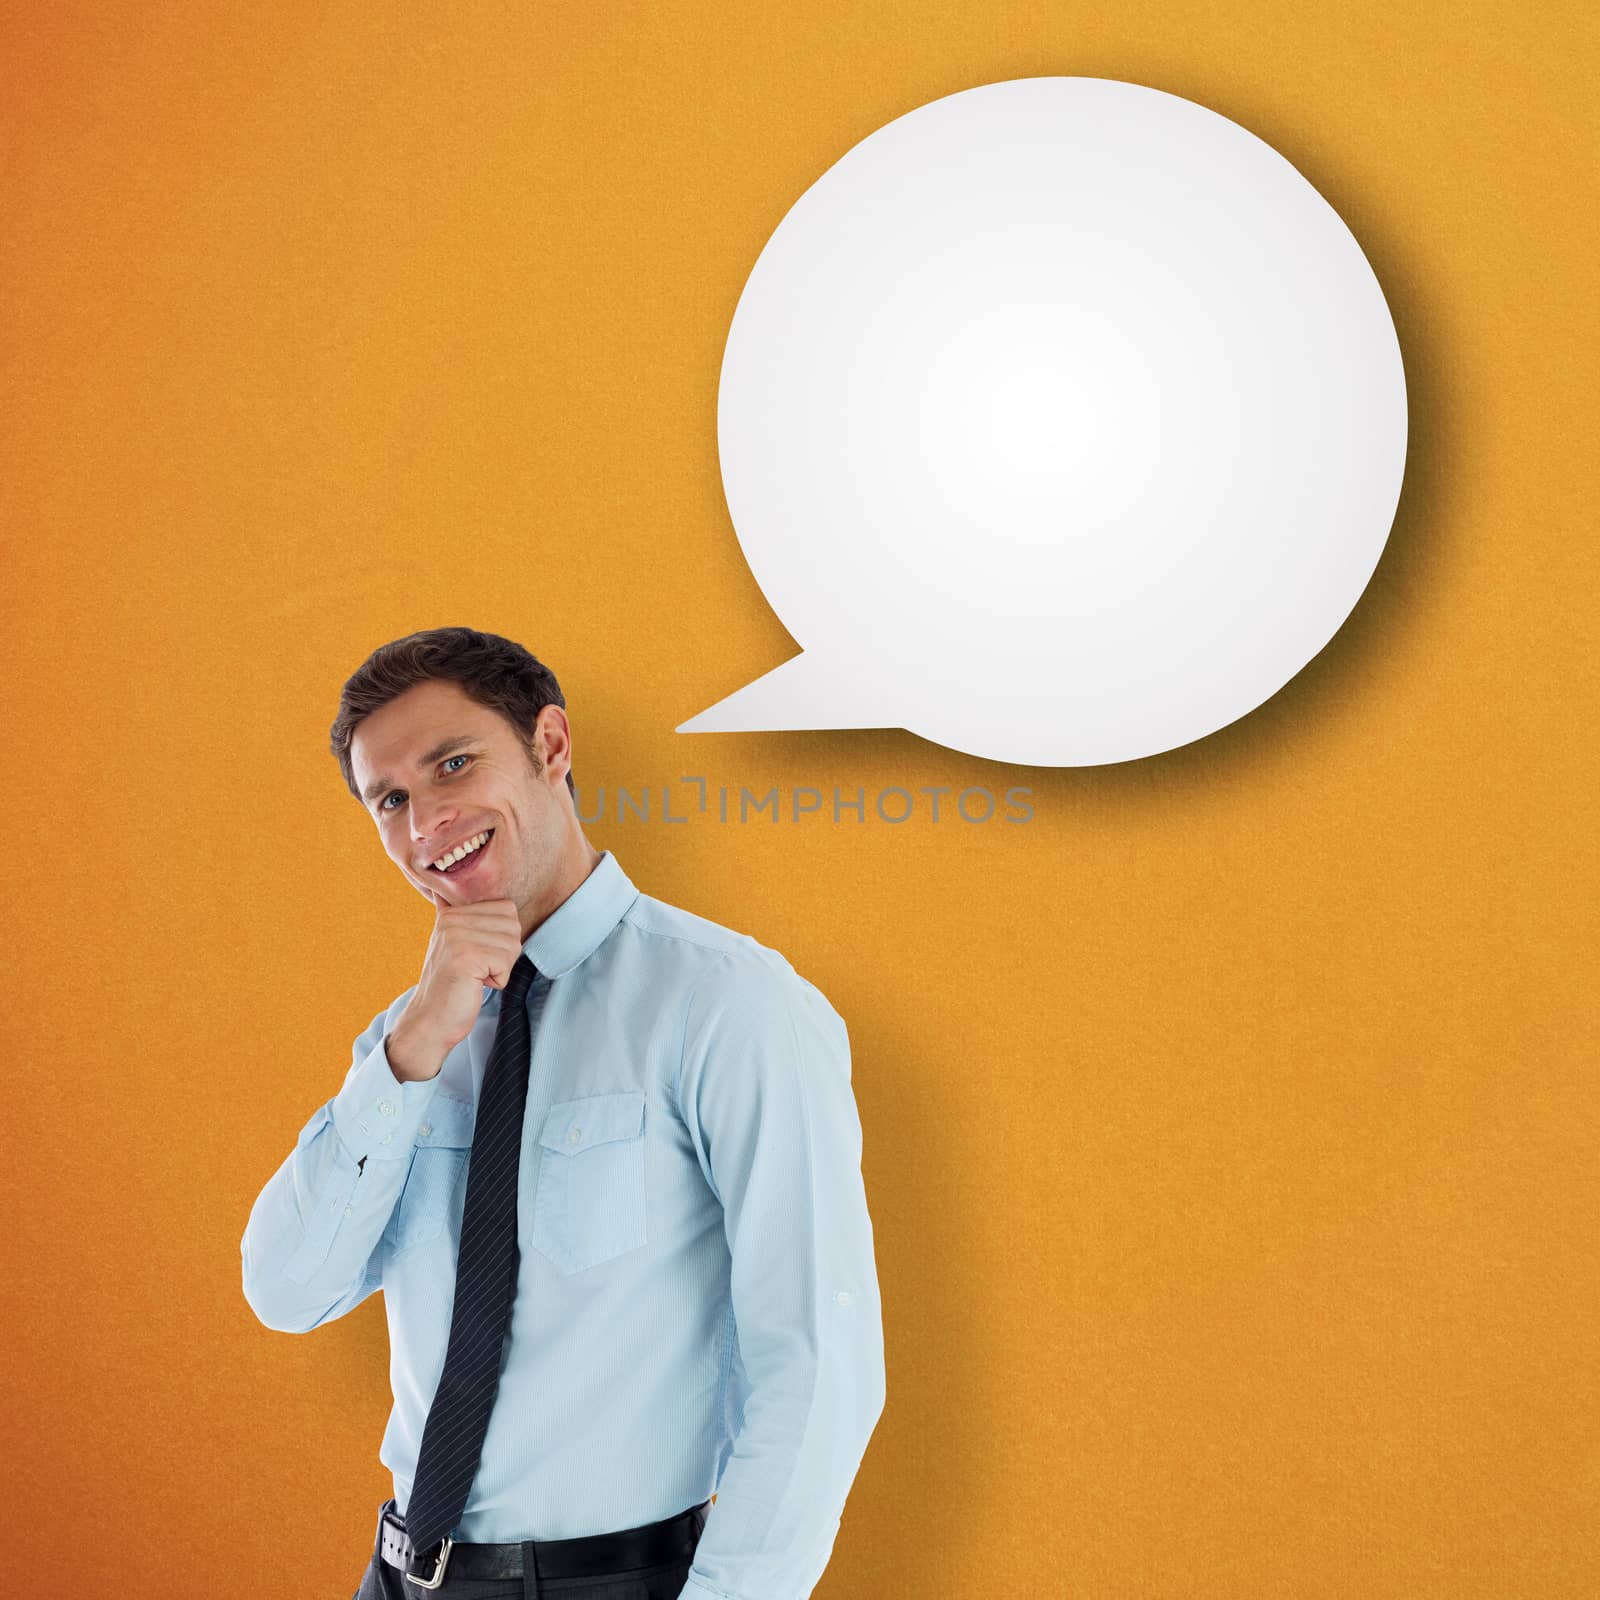 Thoughtful businessman with hand on chin against speech bubble